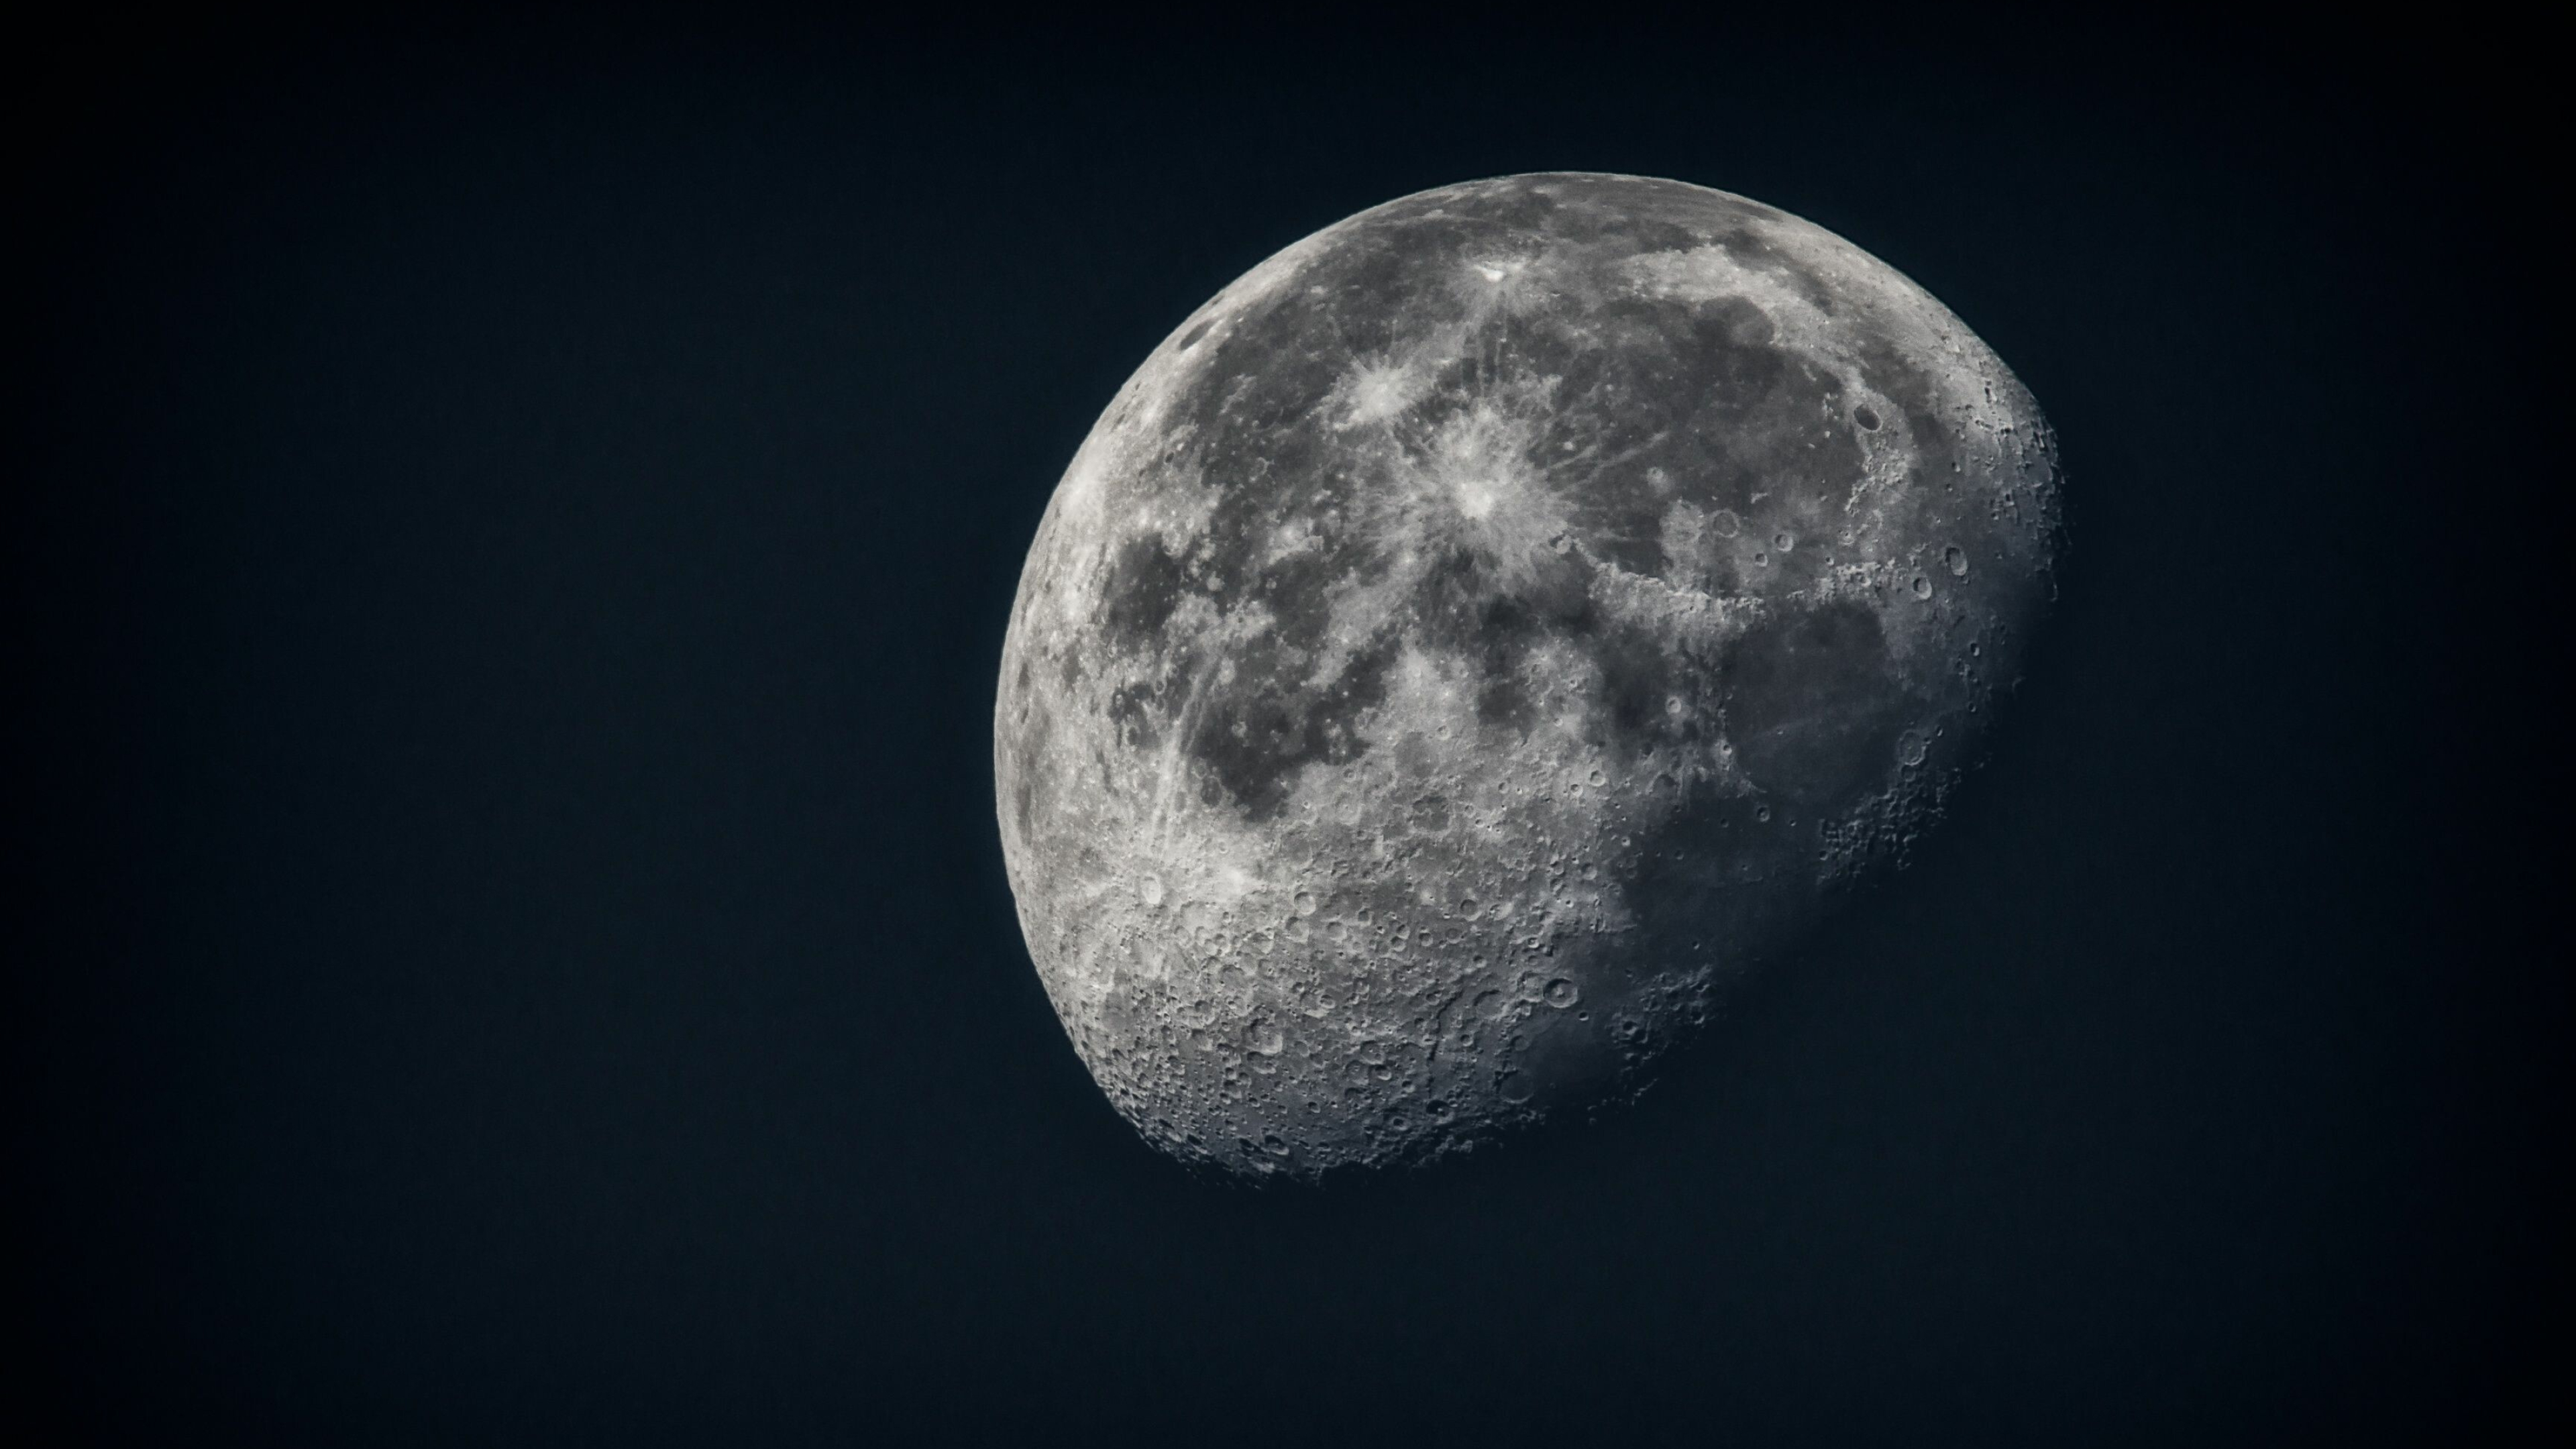 Moon: Celestial body, Night, The period of ambient darkness. 3840x2160 4K Wallpaper.